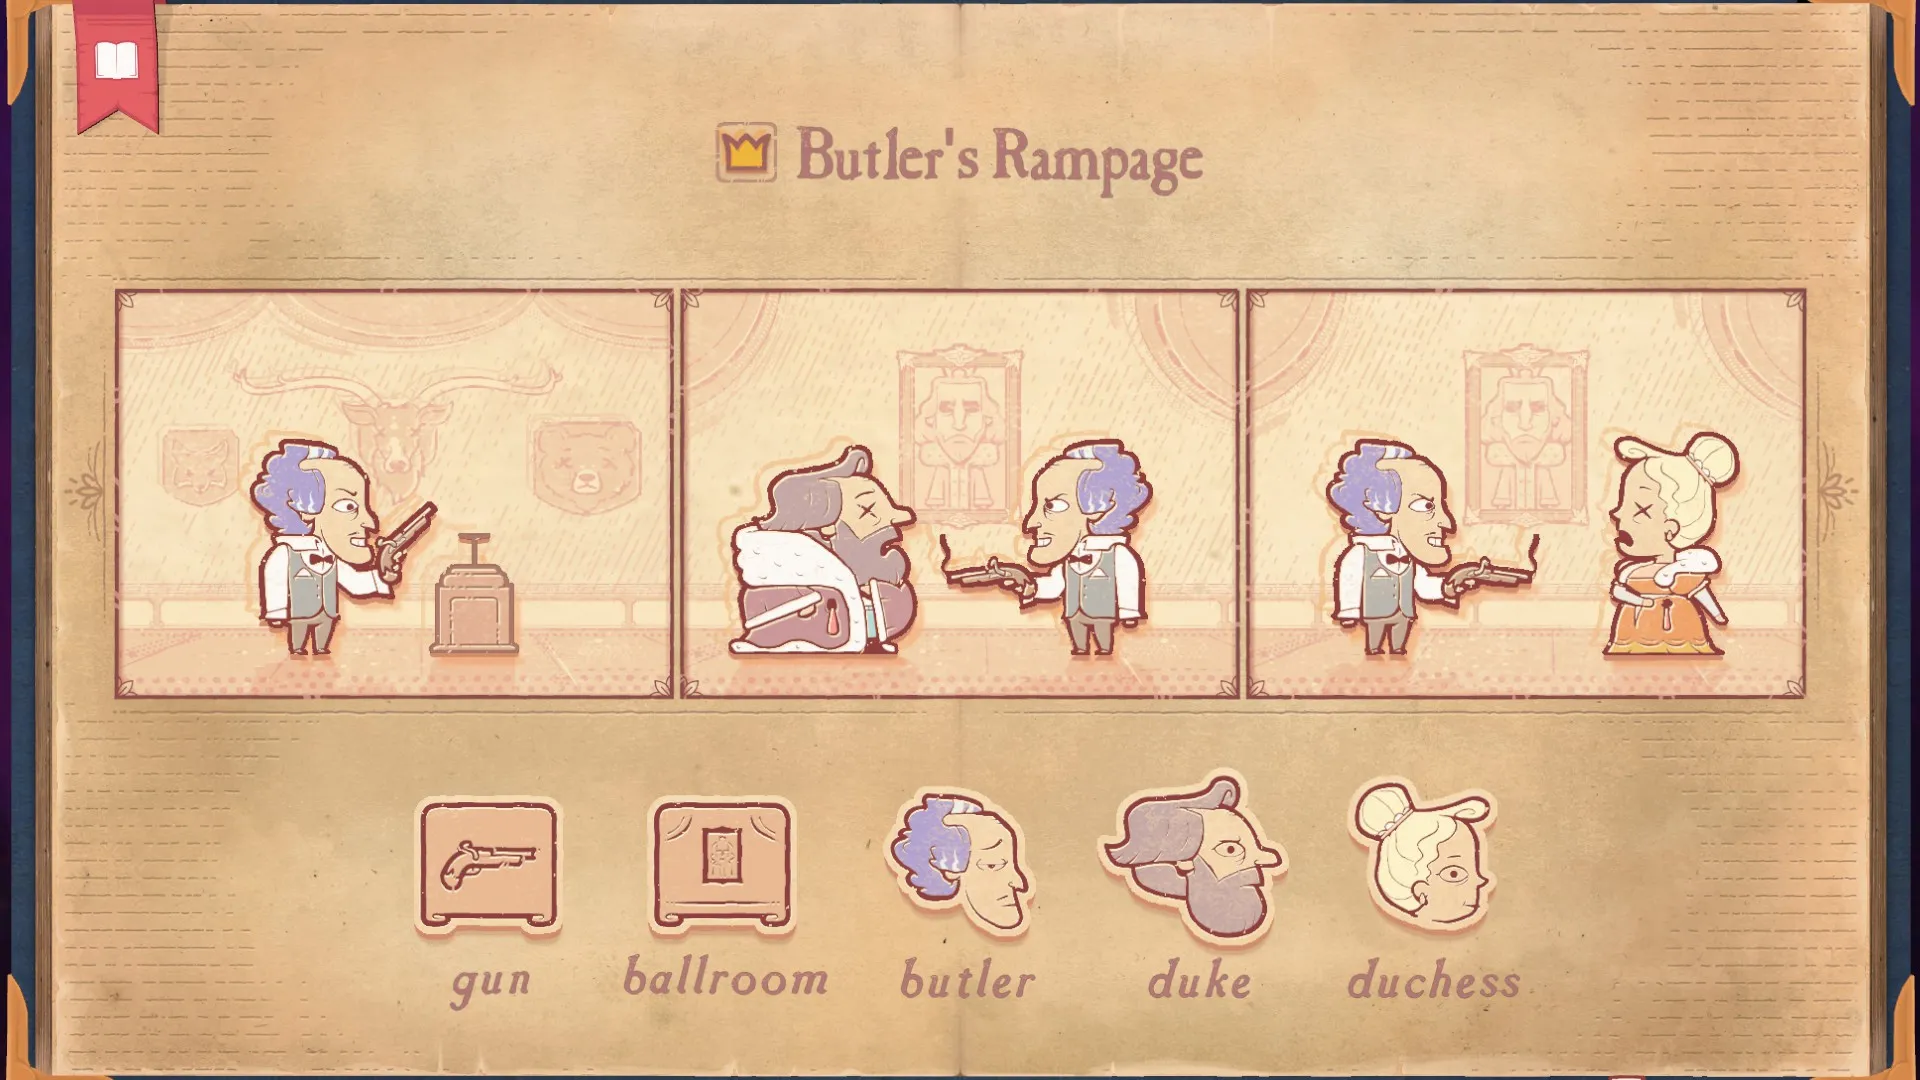 The solution for the Murder section of Storyteller, showing the Butler on a rampage.